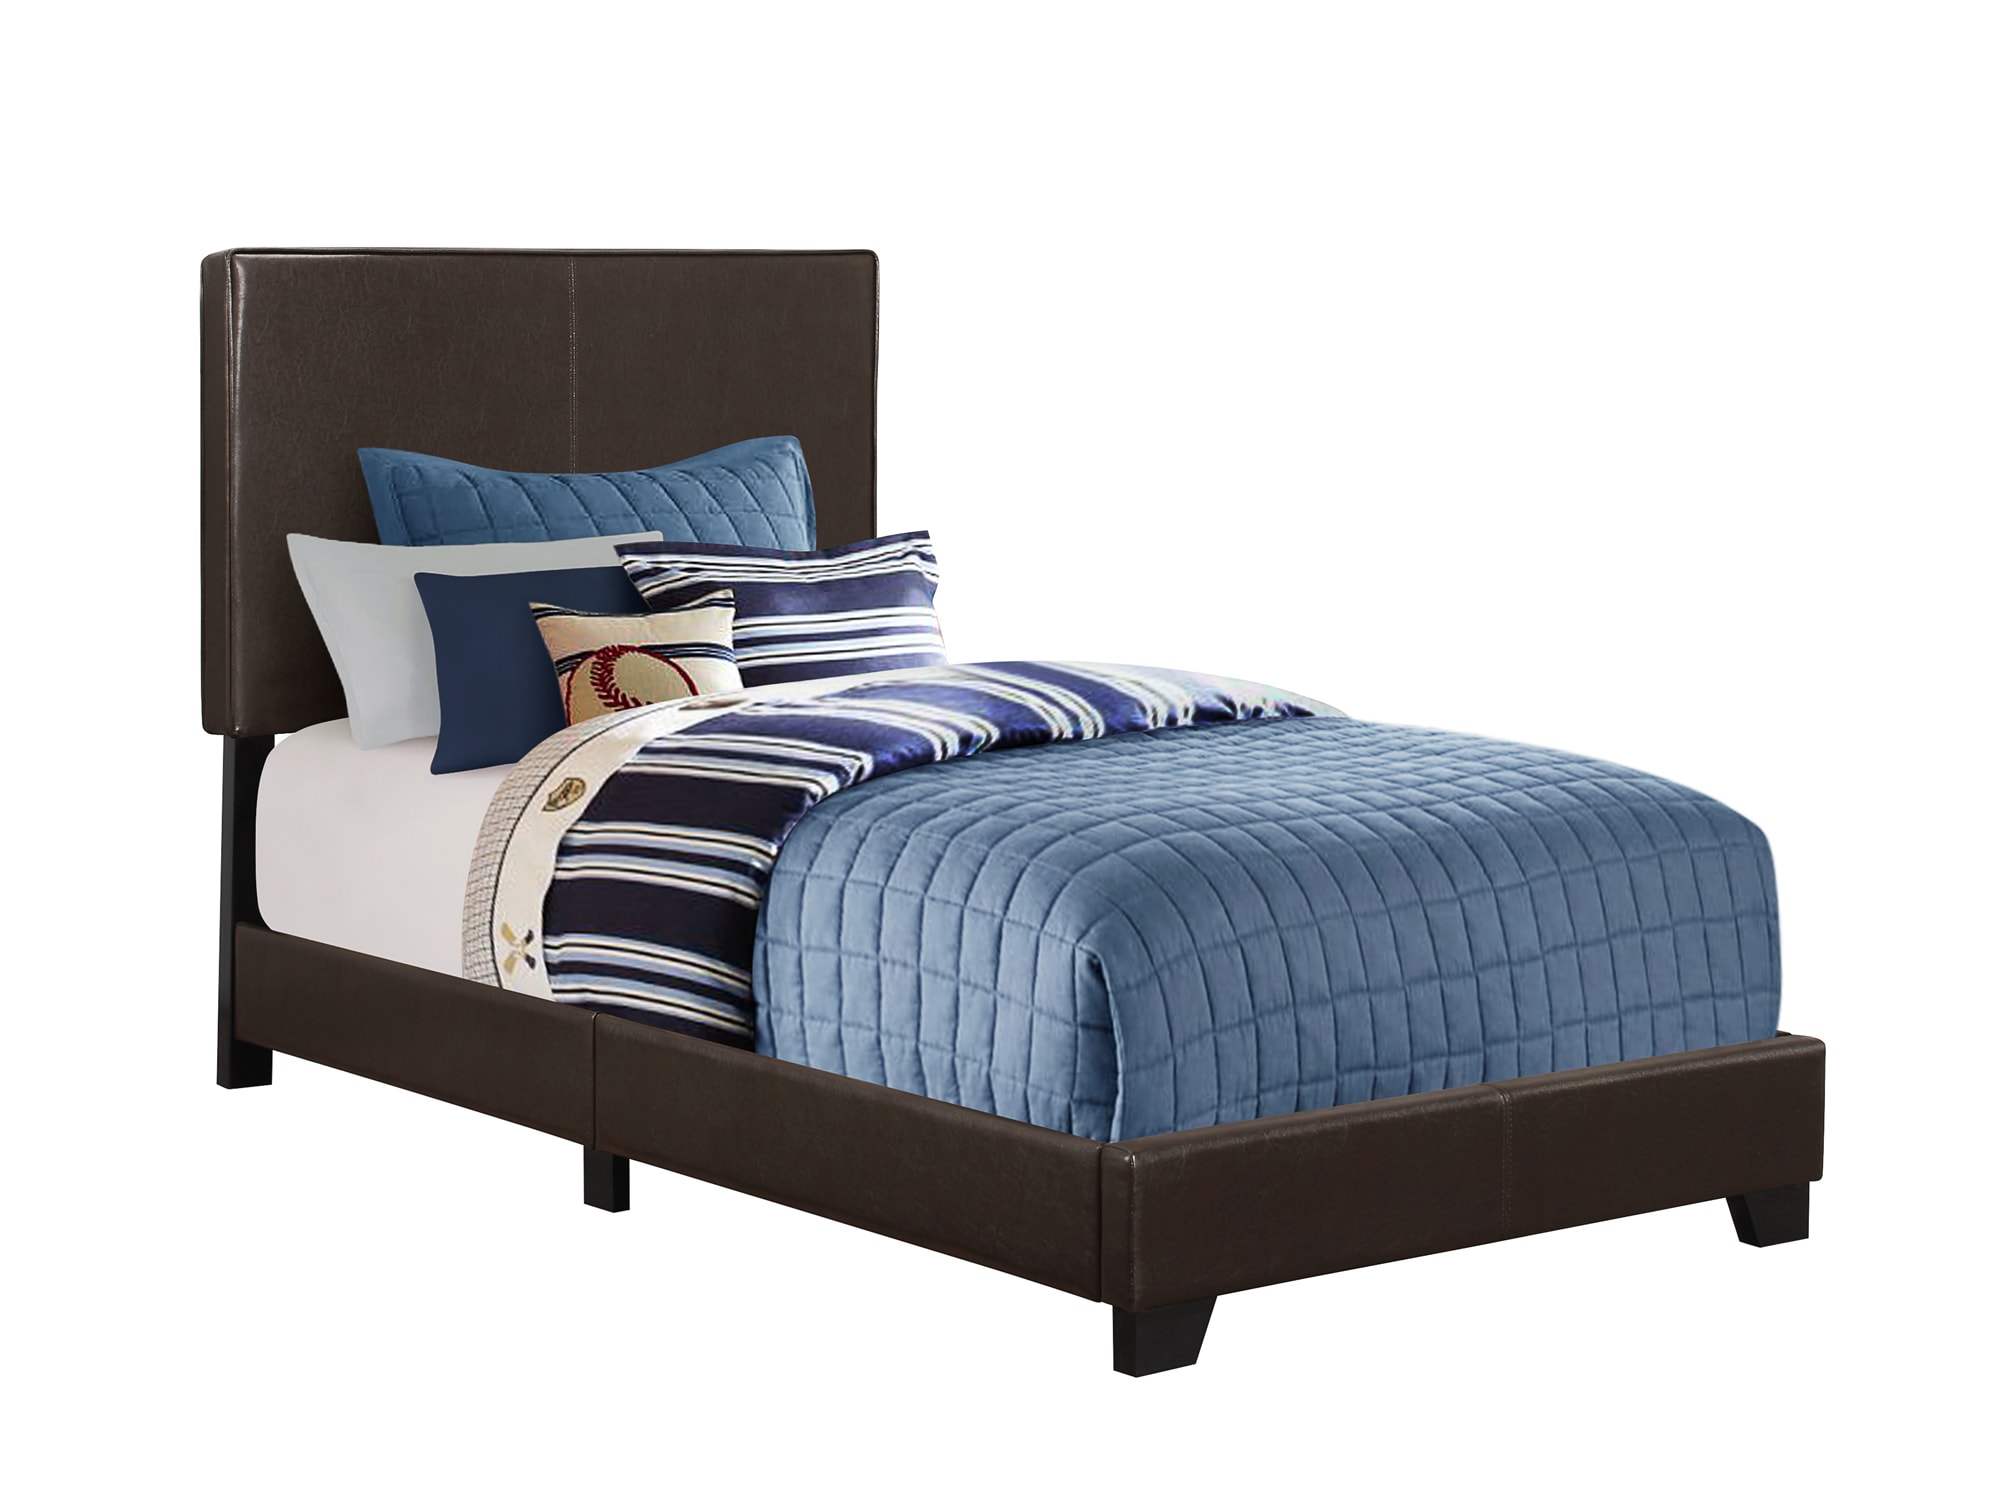 Dark Brown Leather Look Twin Bed Frame, Brown Twin Bed Frame